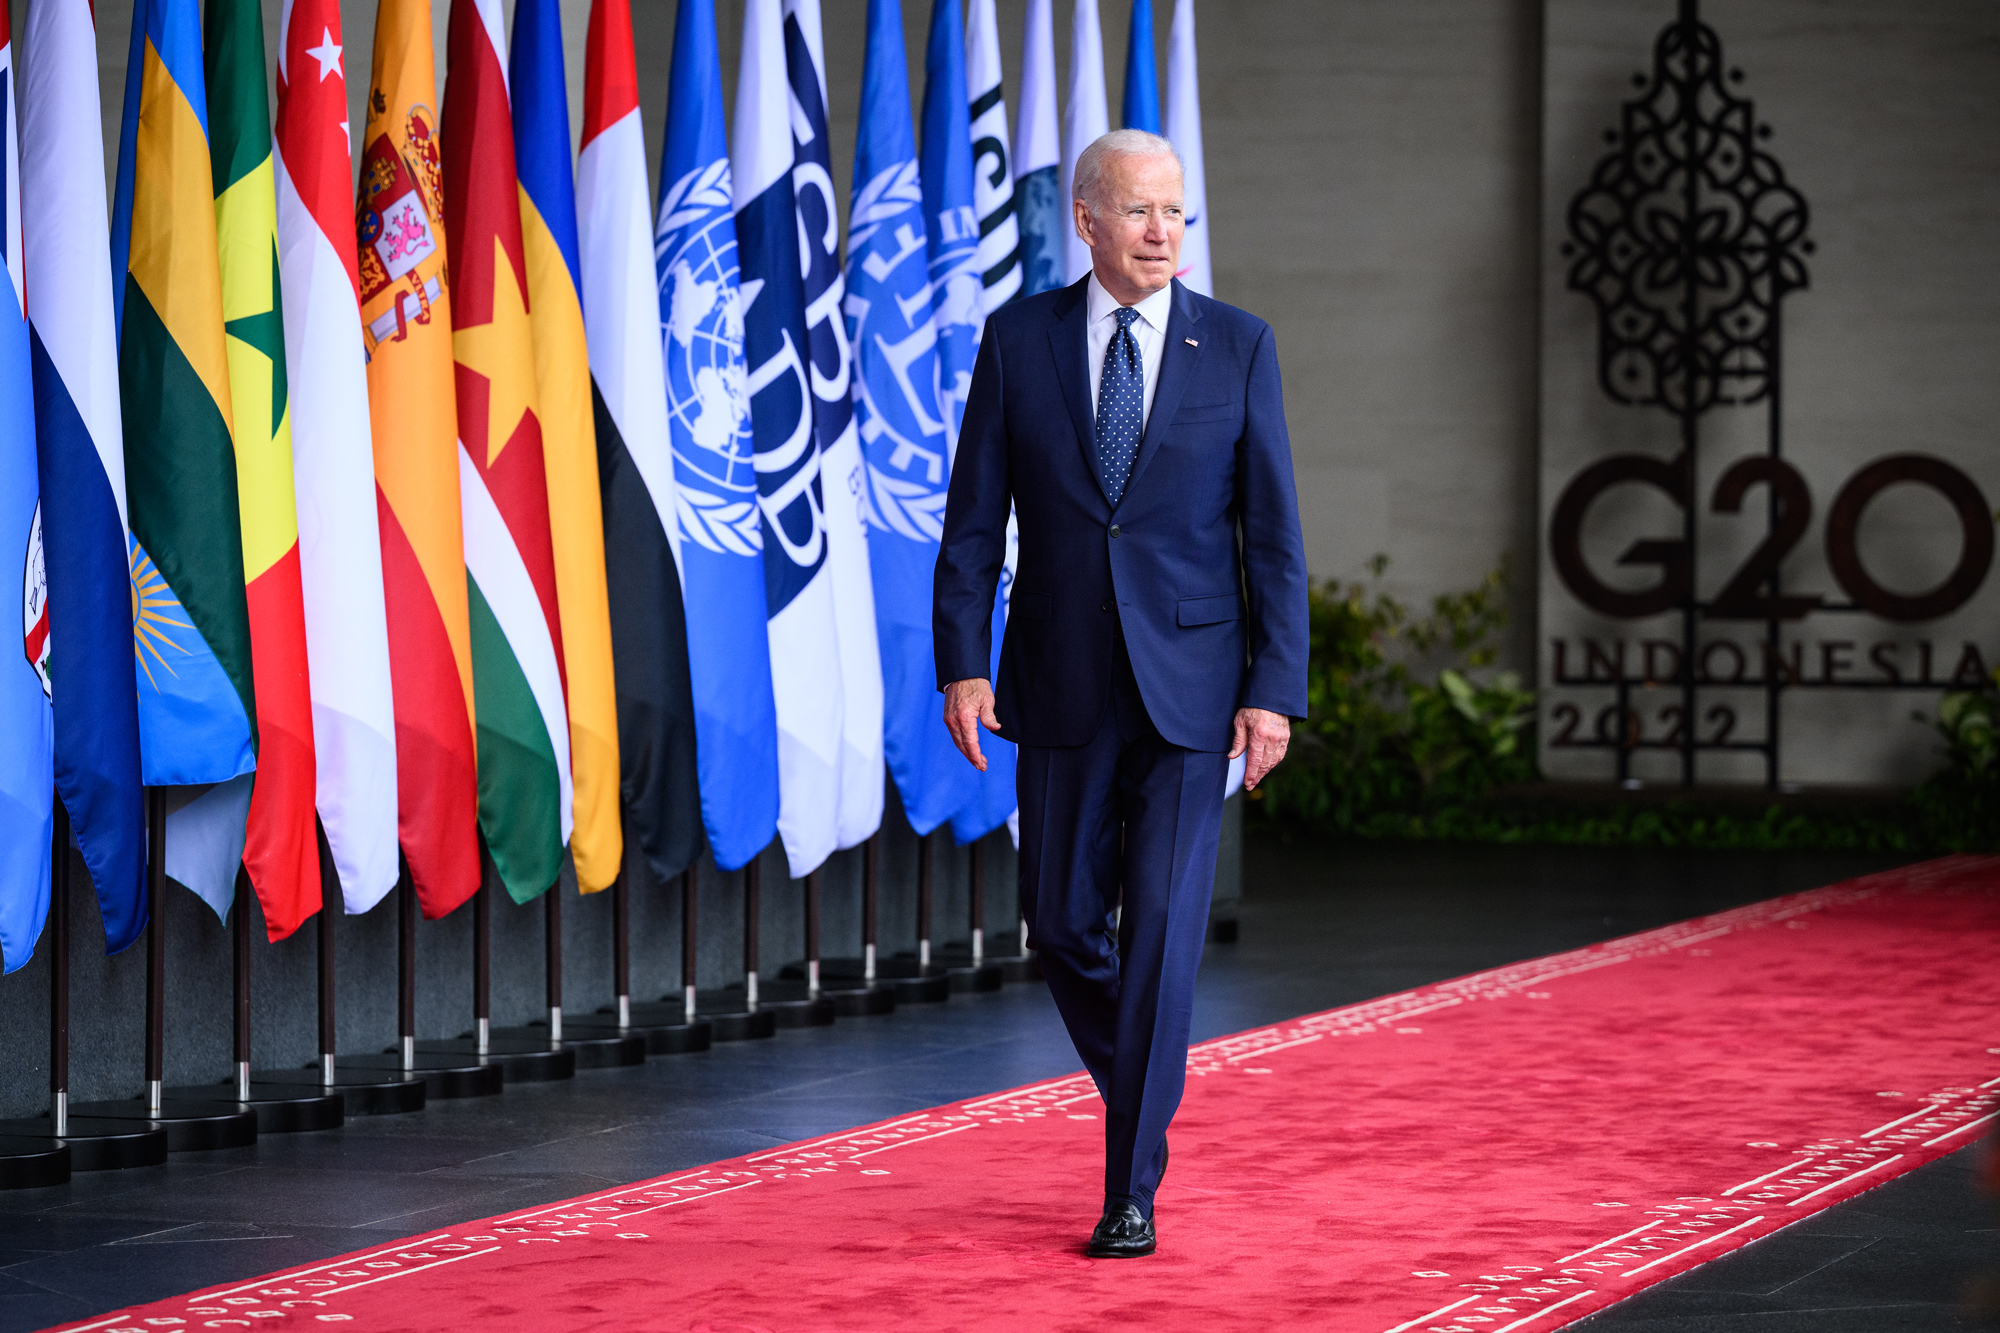 President Joe Biden arrives at the formal welcome ceremony to mark the beginning of the G20 Summit in Bali, Indonesia, on Tuesday.